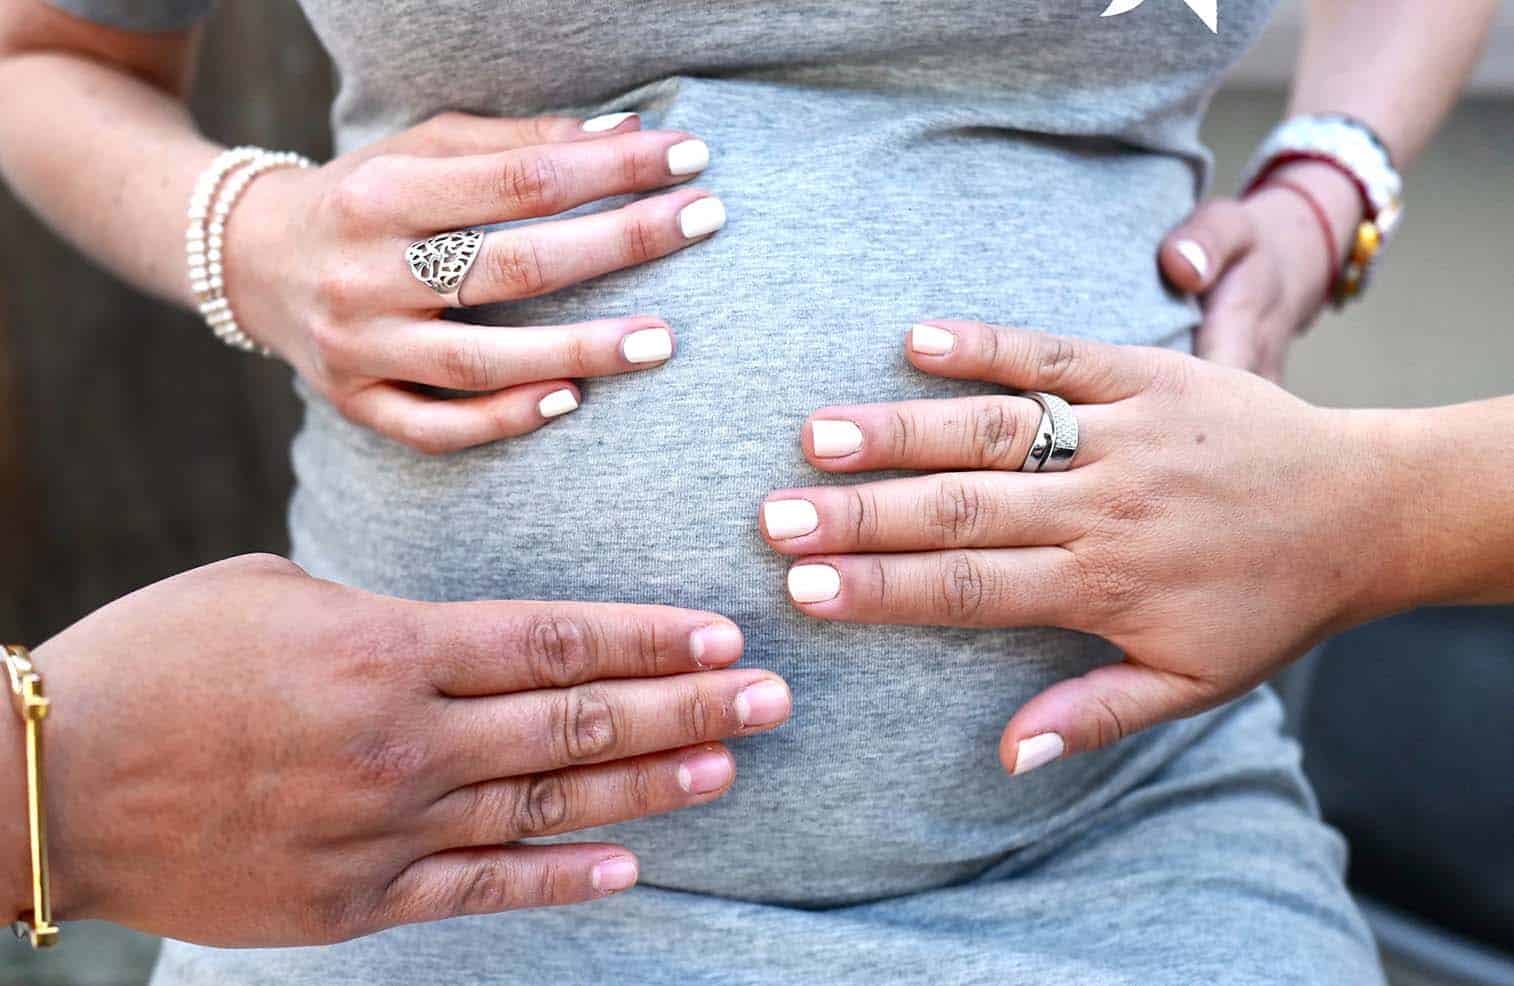 Admitting that you hate being pregnant can be difficult to do. Pregnancy isn't all glowing skin and radiant energy - for some women it is really difficult.